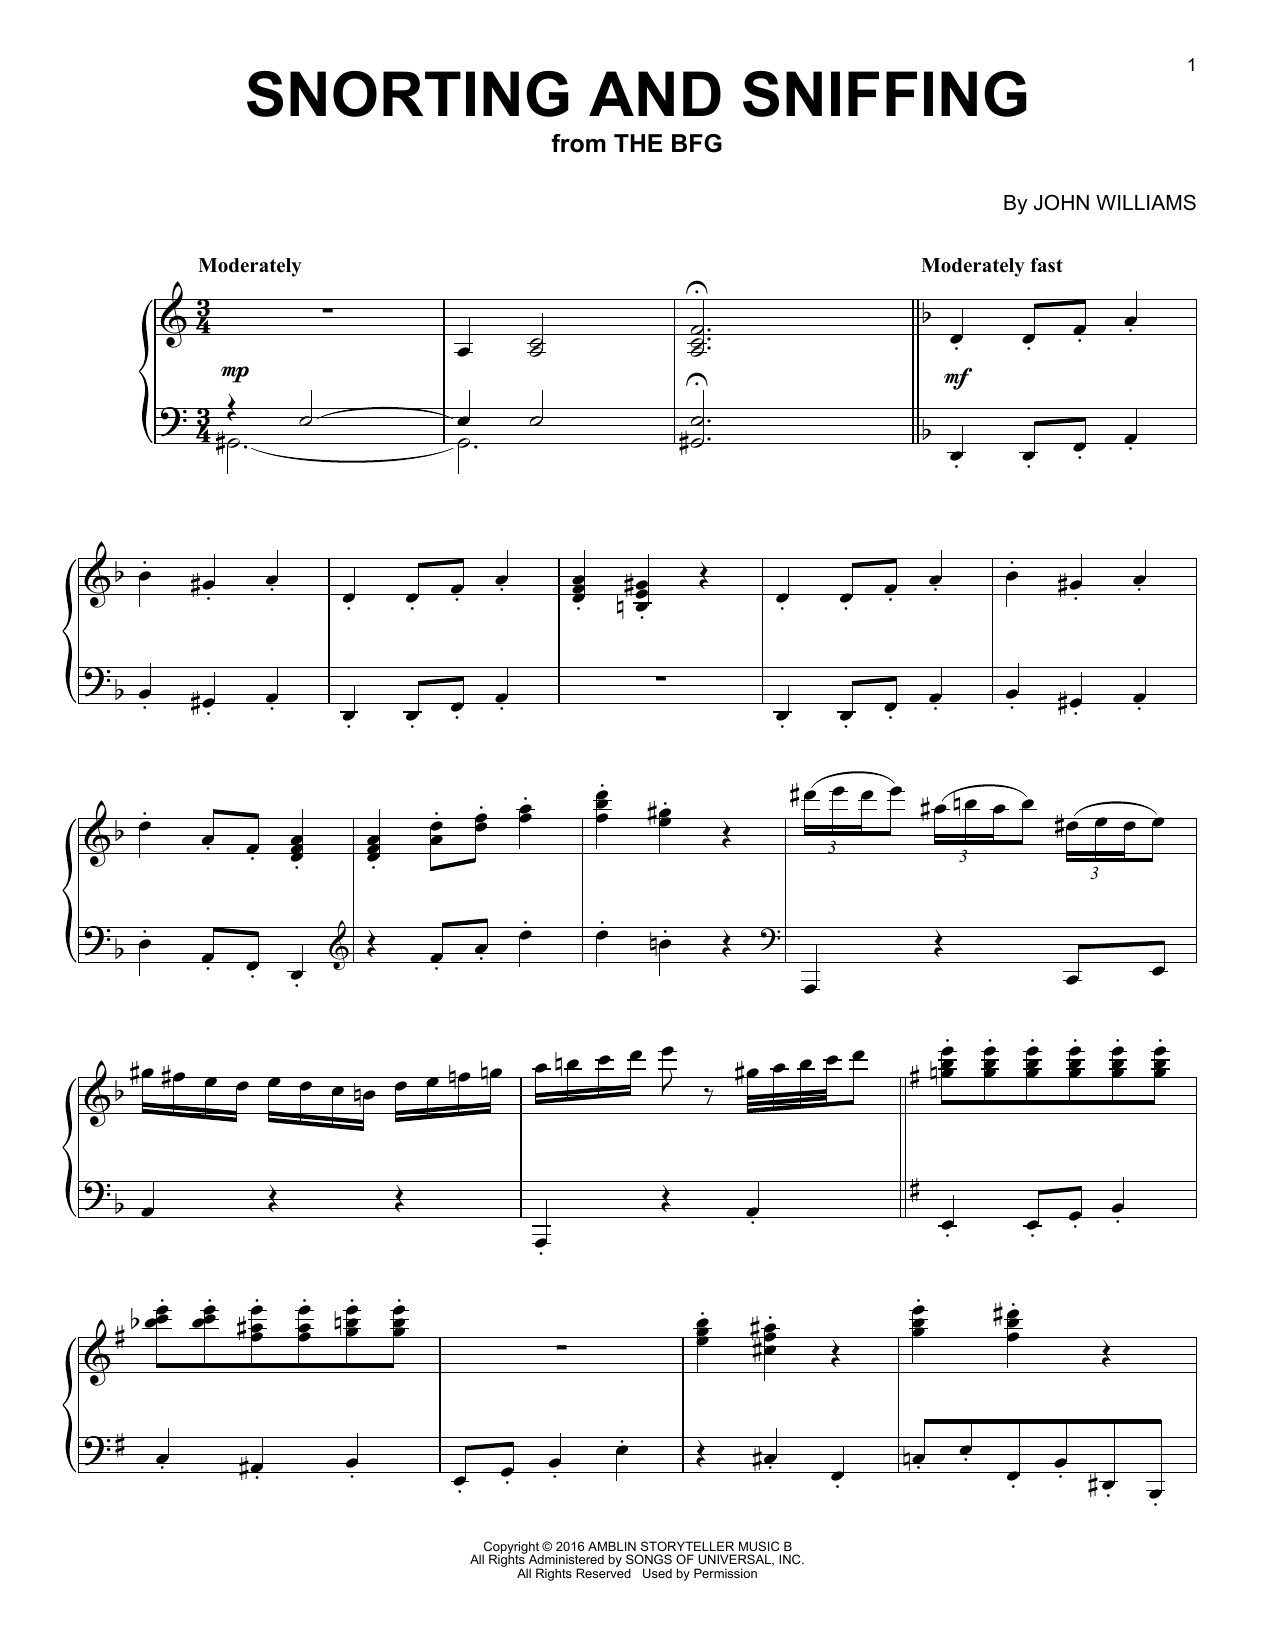 Download John Williams Snorting And Sniffing Sheet Music